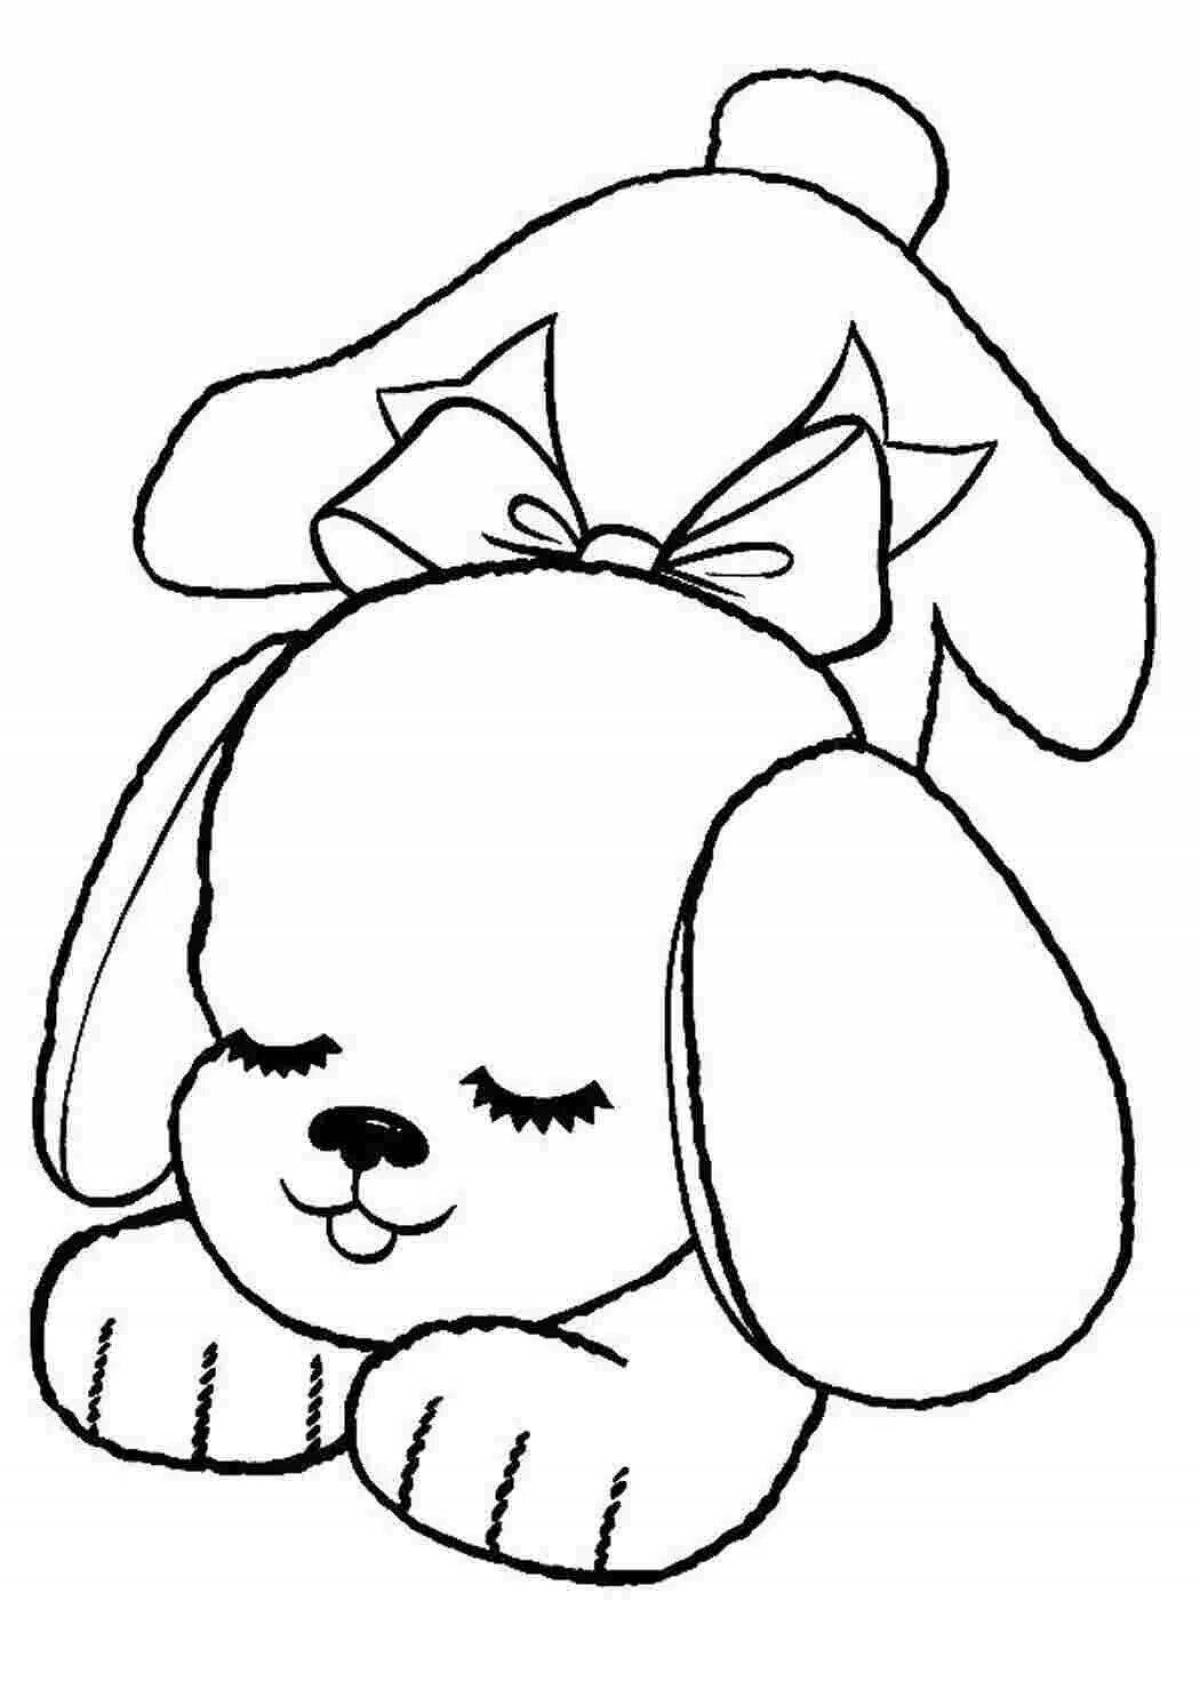 Coloring page loving cute puppy